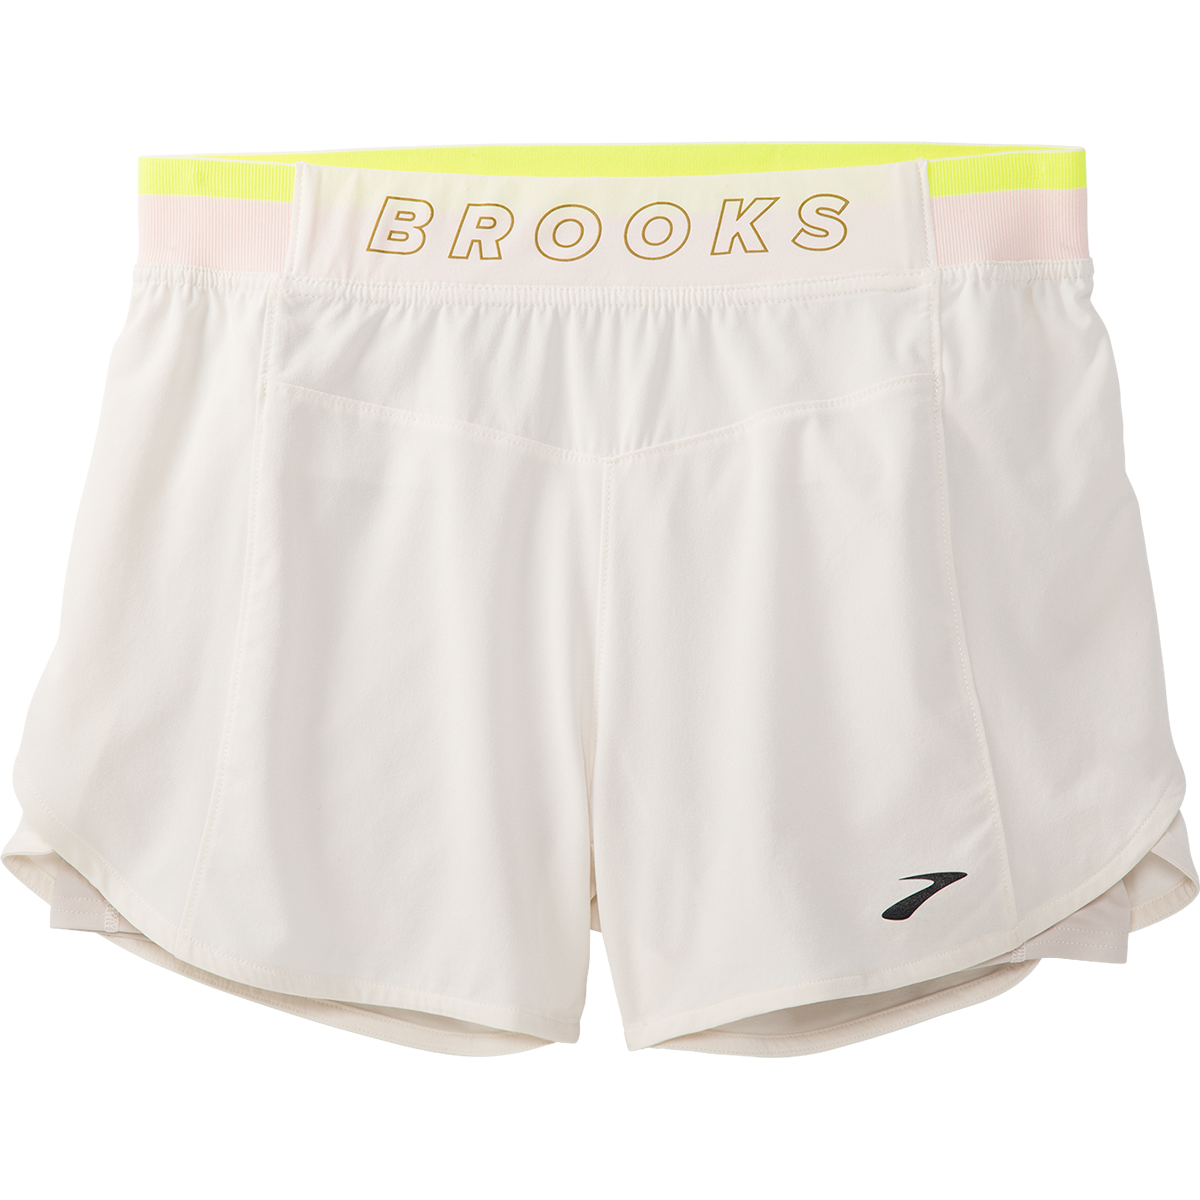 Brooks Run Within 4" 2-in-1 Short, , large image number null